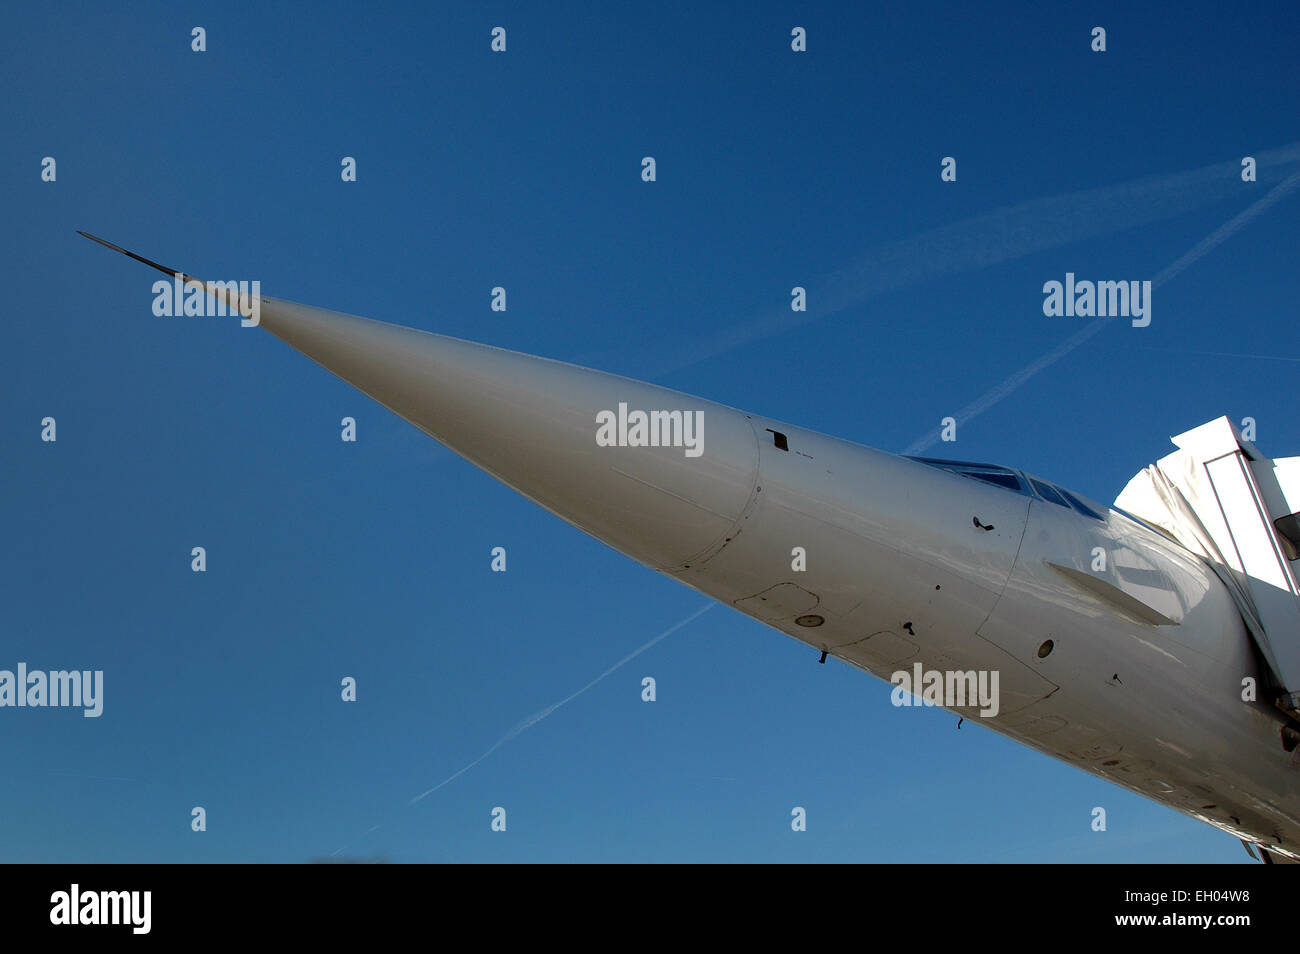 The nose of the supersonic passenger transport Concorde. Stock Photo